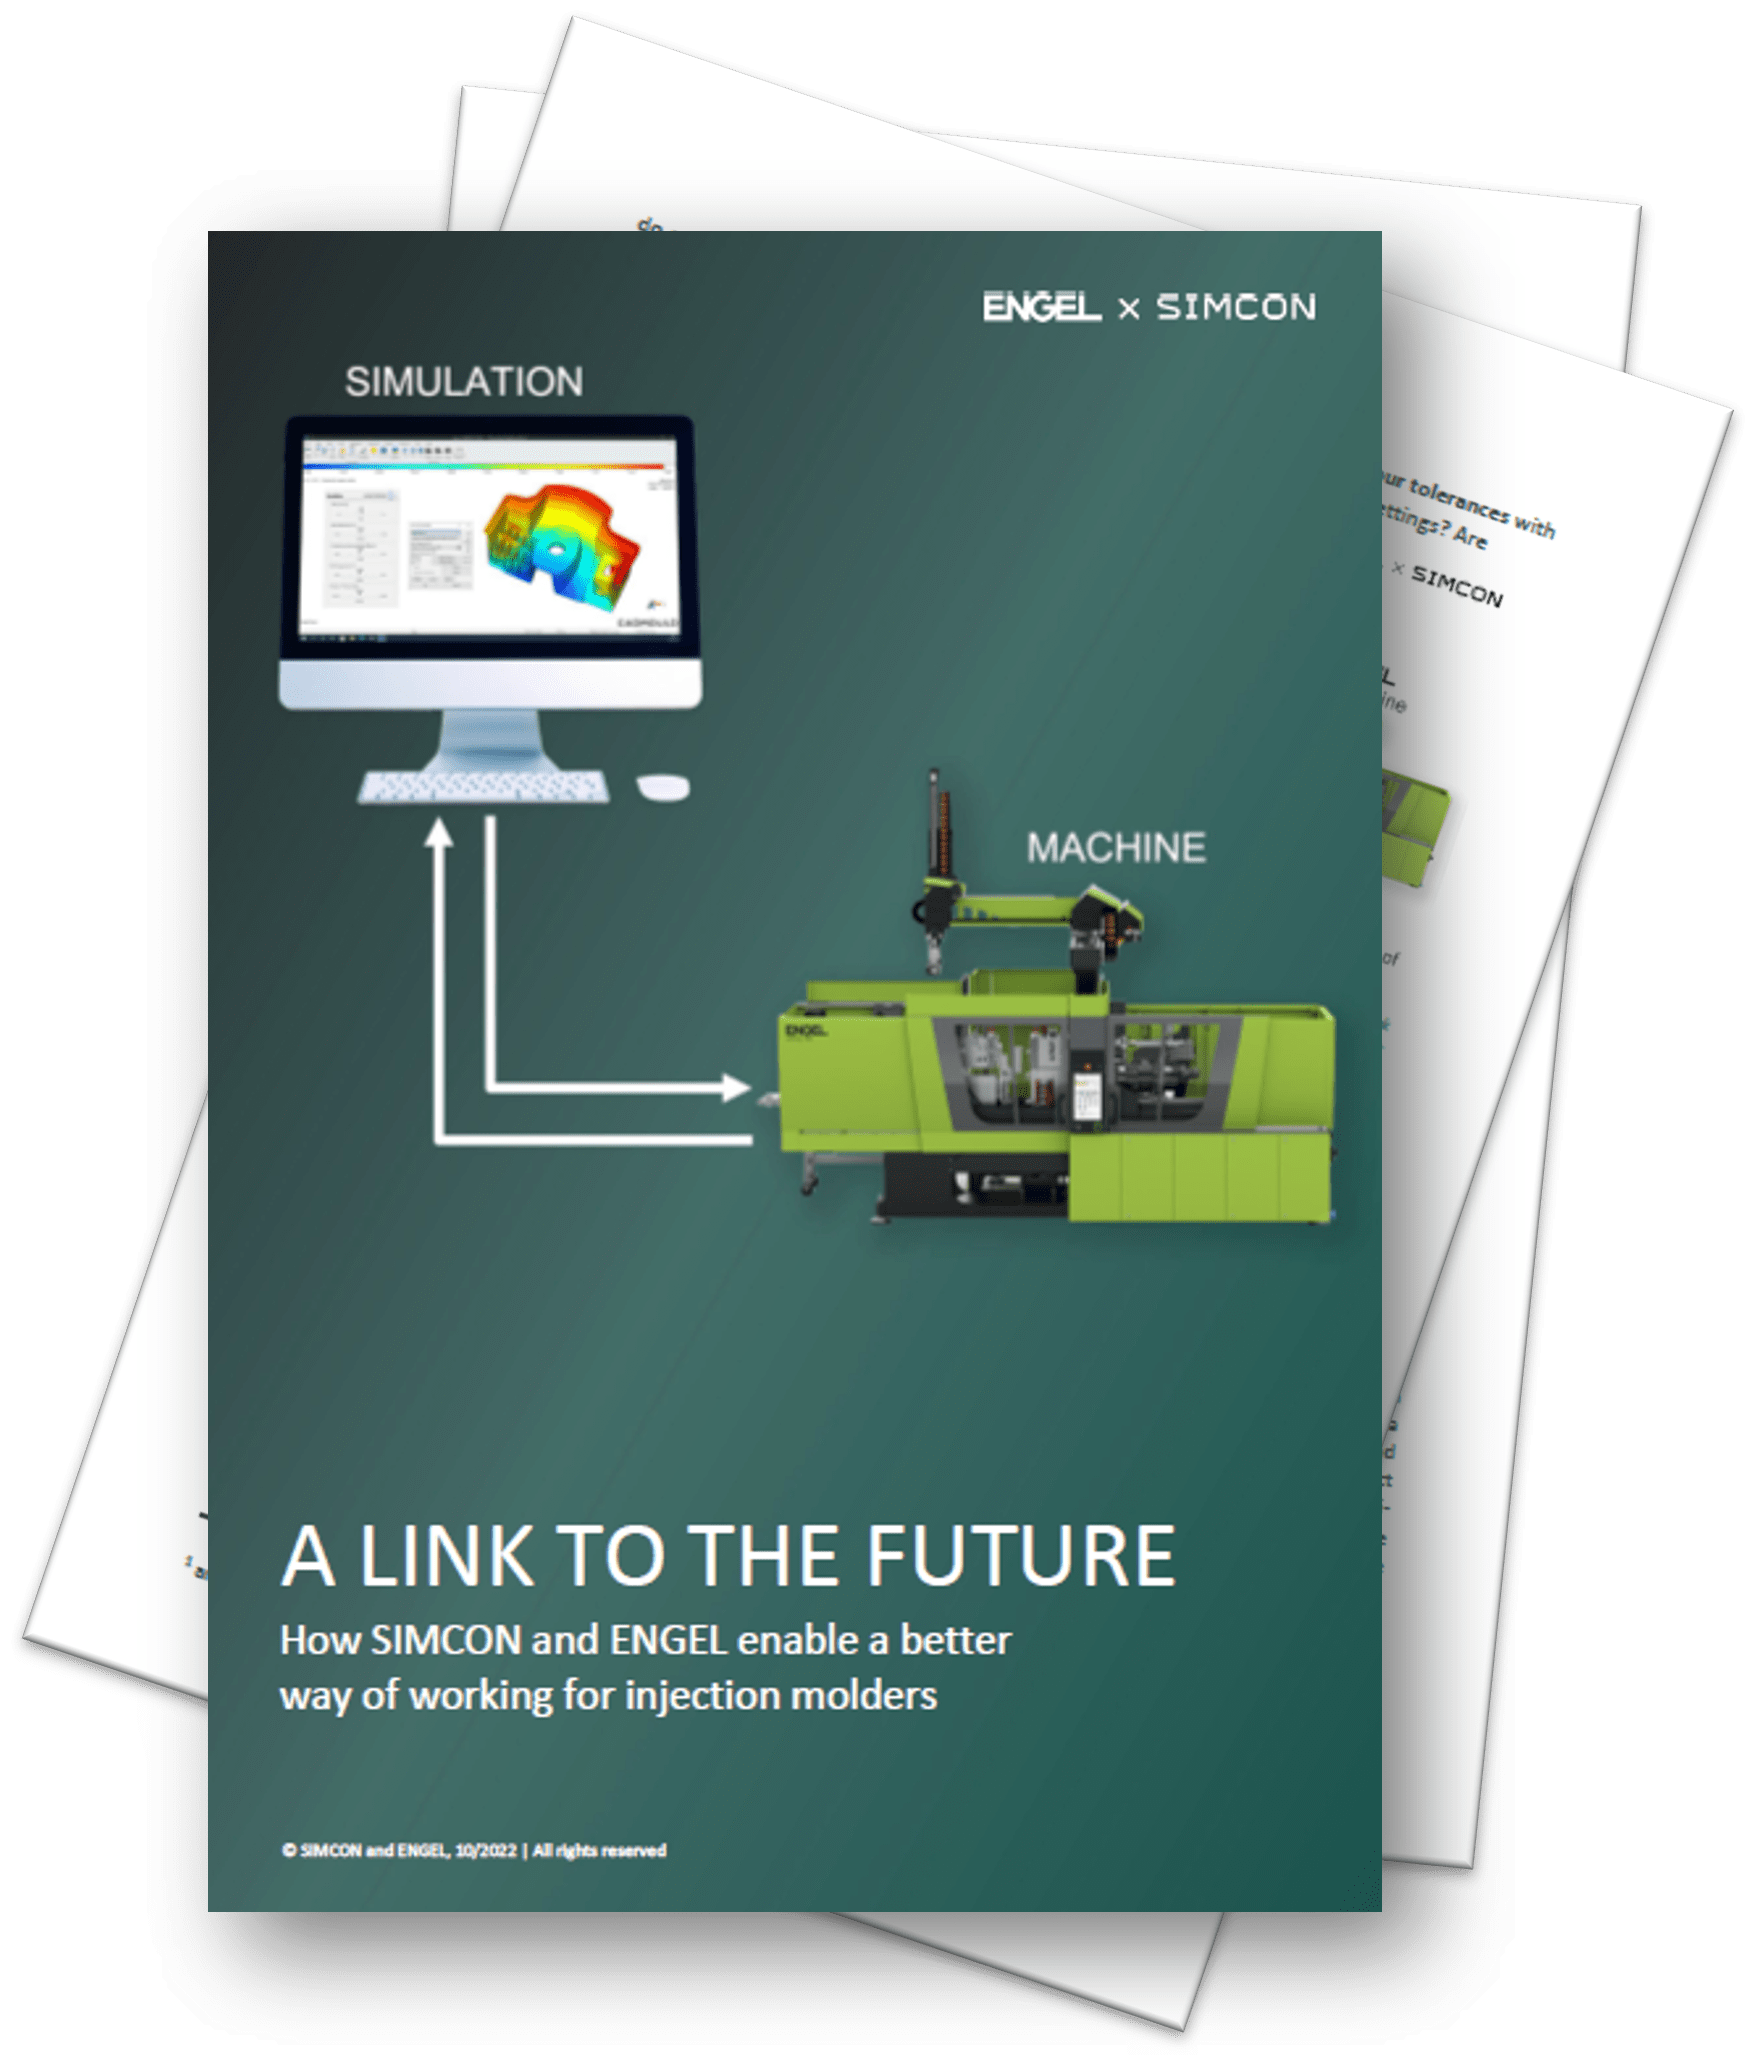 Link to the future with ENGEL